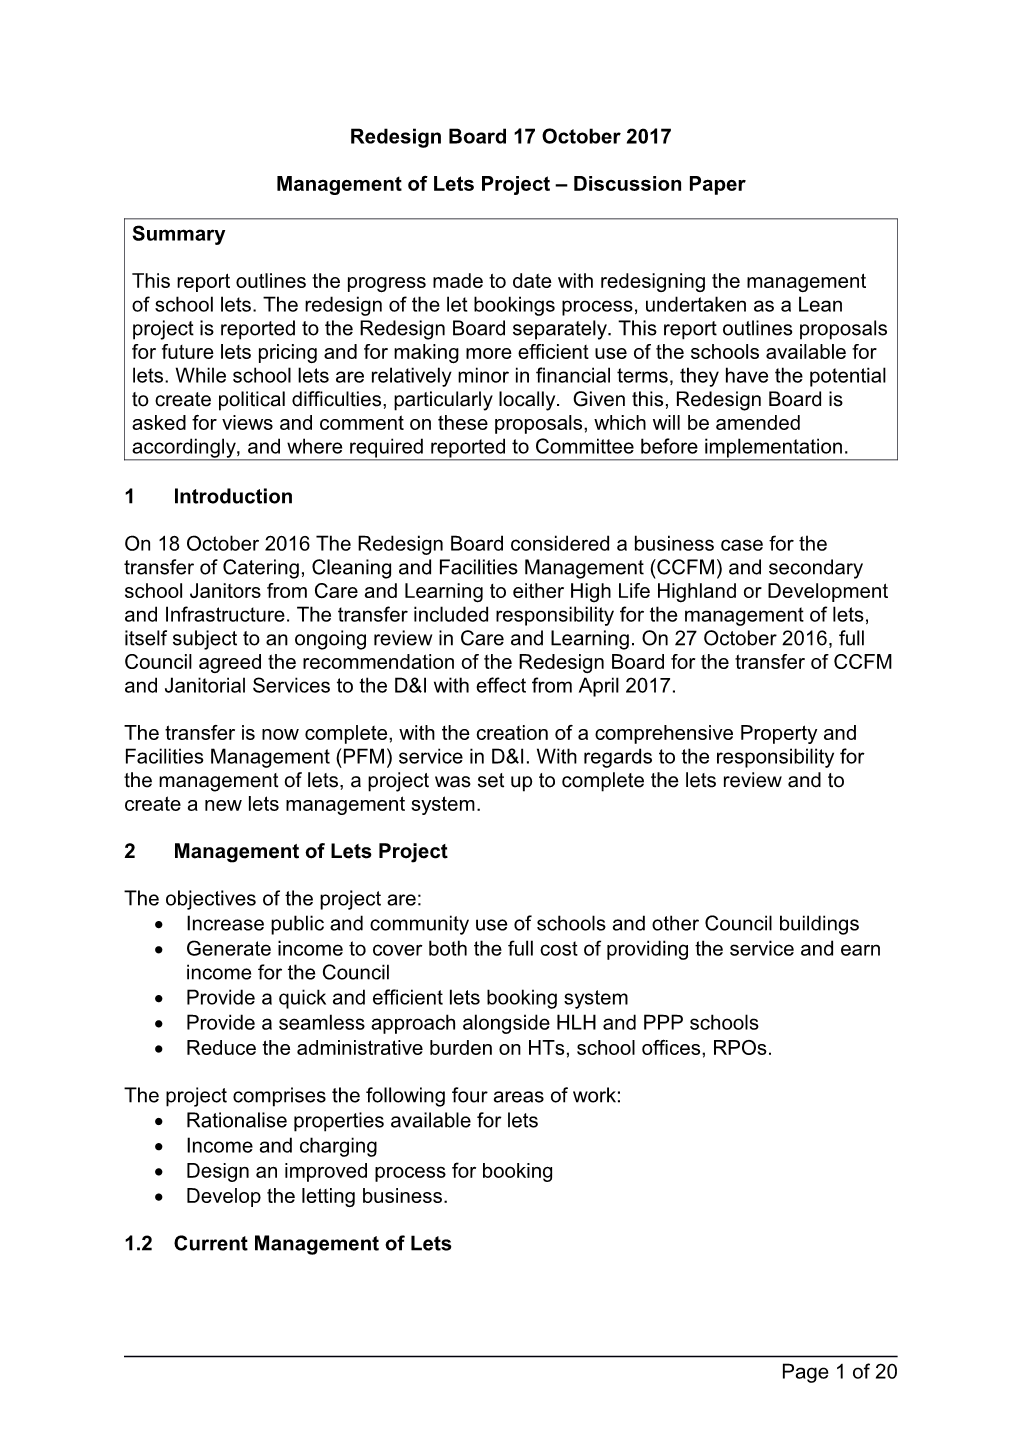 Management of Lets Project Discussion Paper